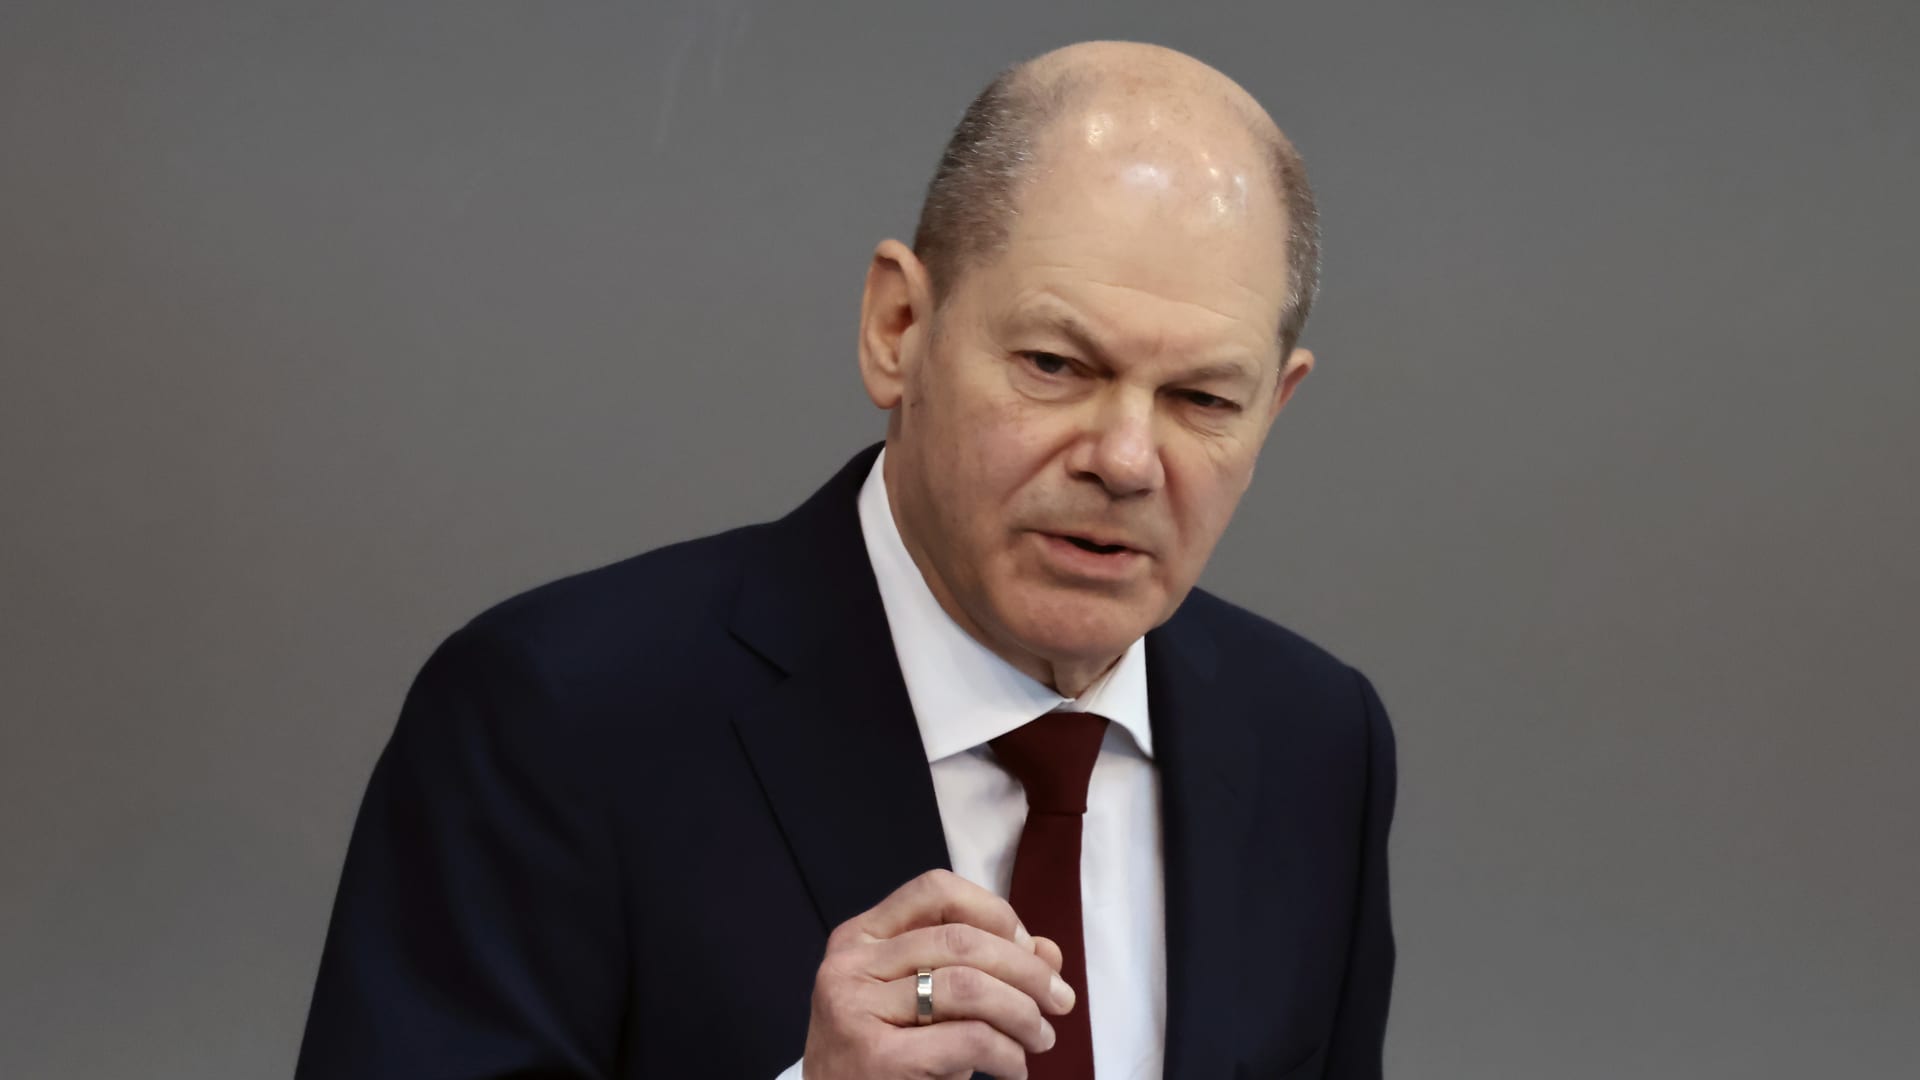 German Chancellor Olaf Scholz delivers a speech on the Russian invasion of the Ukraine during a meeting of the German federal parliament, the Bundestag, at the Reichstag building on February 27, 2022 in Berlin, Germany.